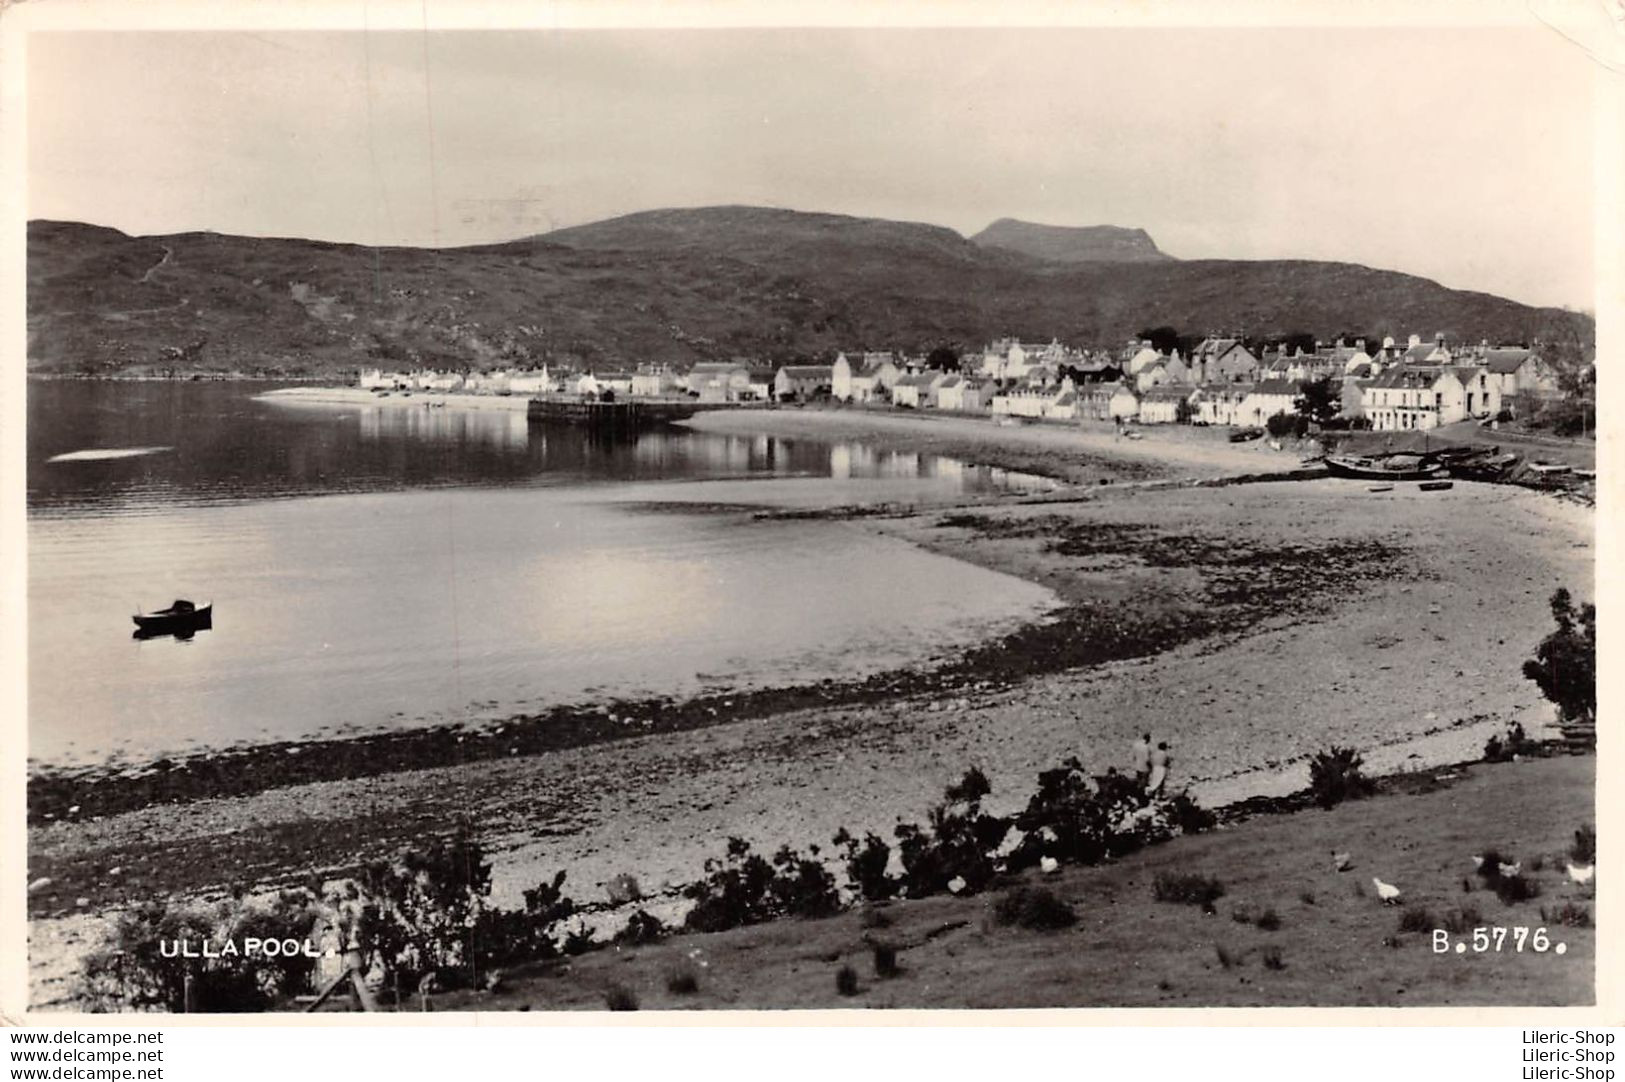 Fine Panorama Of ULLAPOOL - Ross & Cromarty - Highlands - SCOTLAND. Real Photograph 1954 - Ross & Cromarty